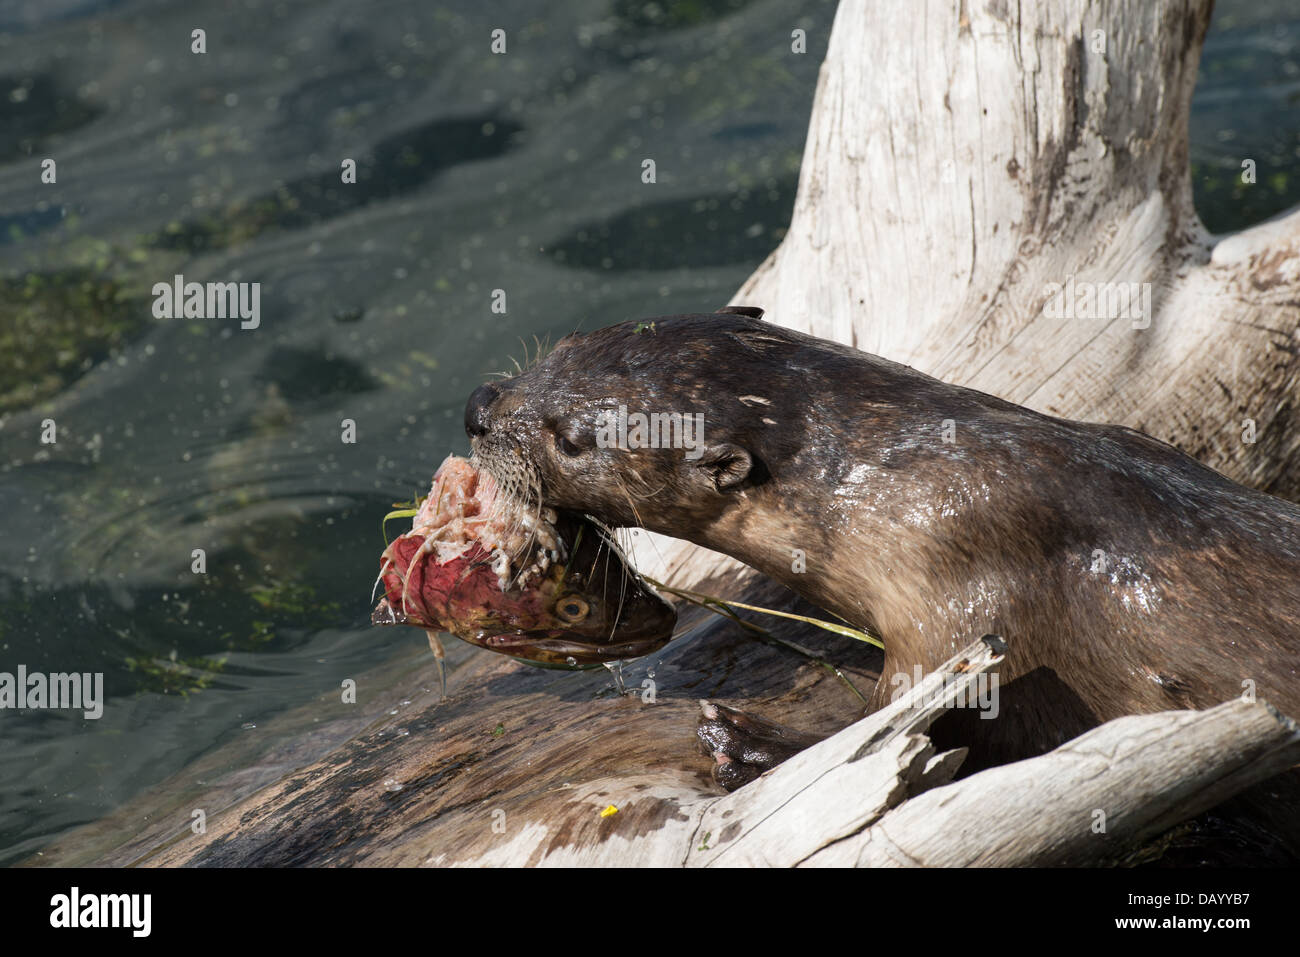 Stock photo of a North American river otter eating the head of a trout. Stock Photo